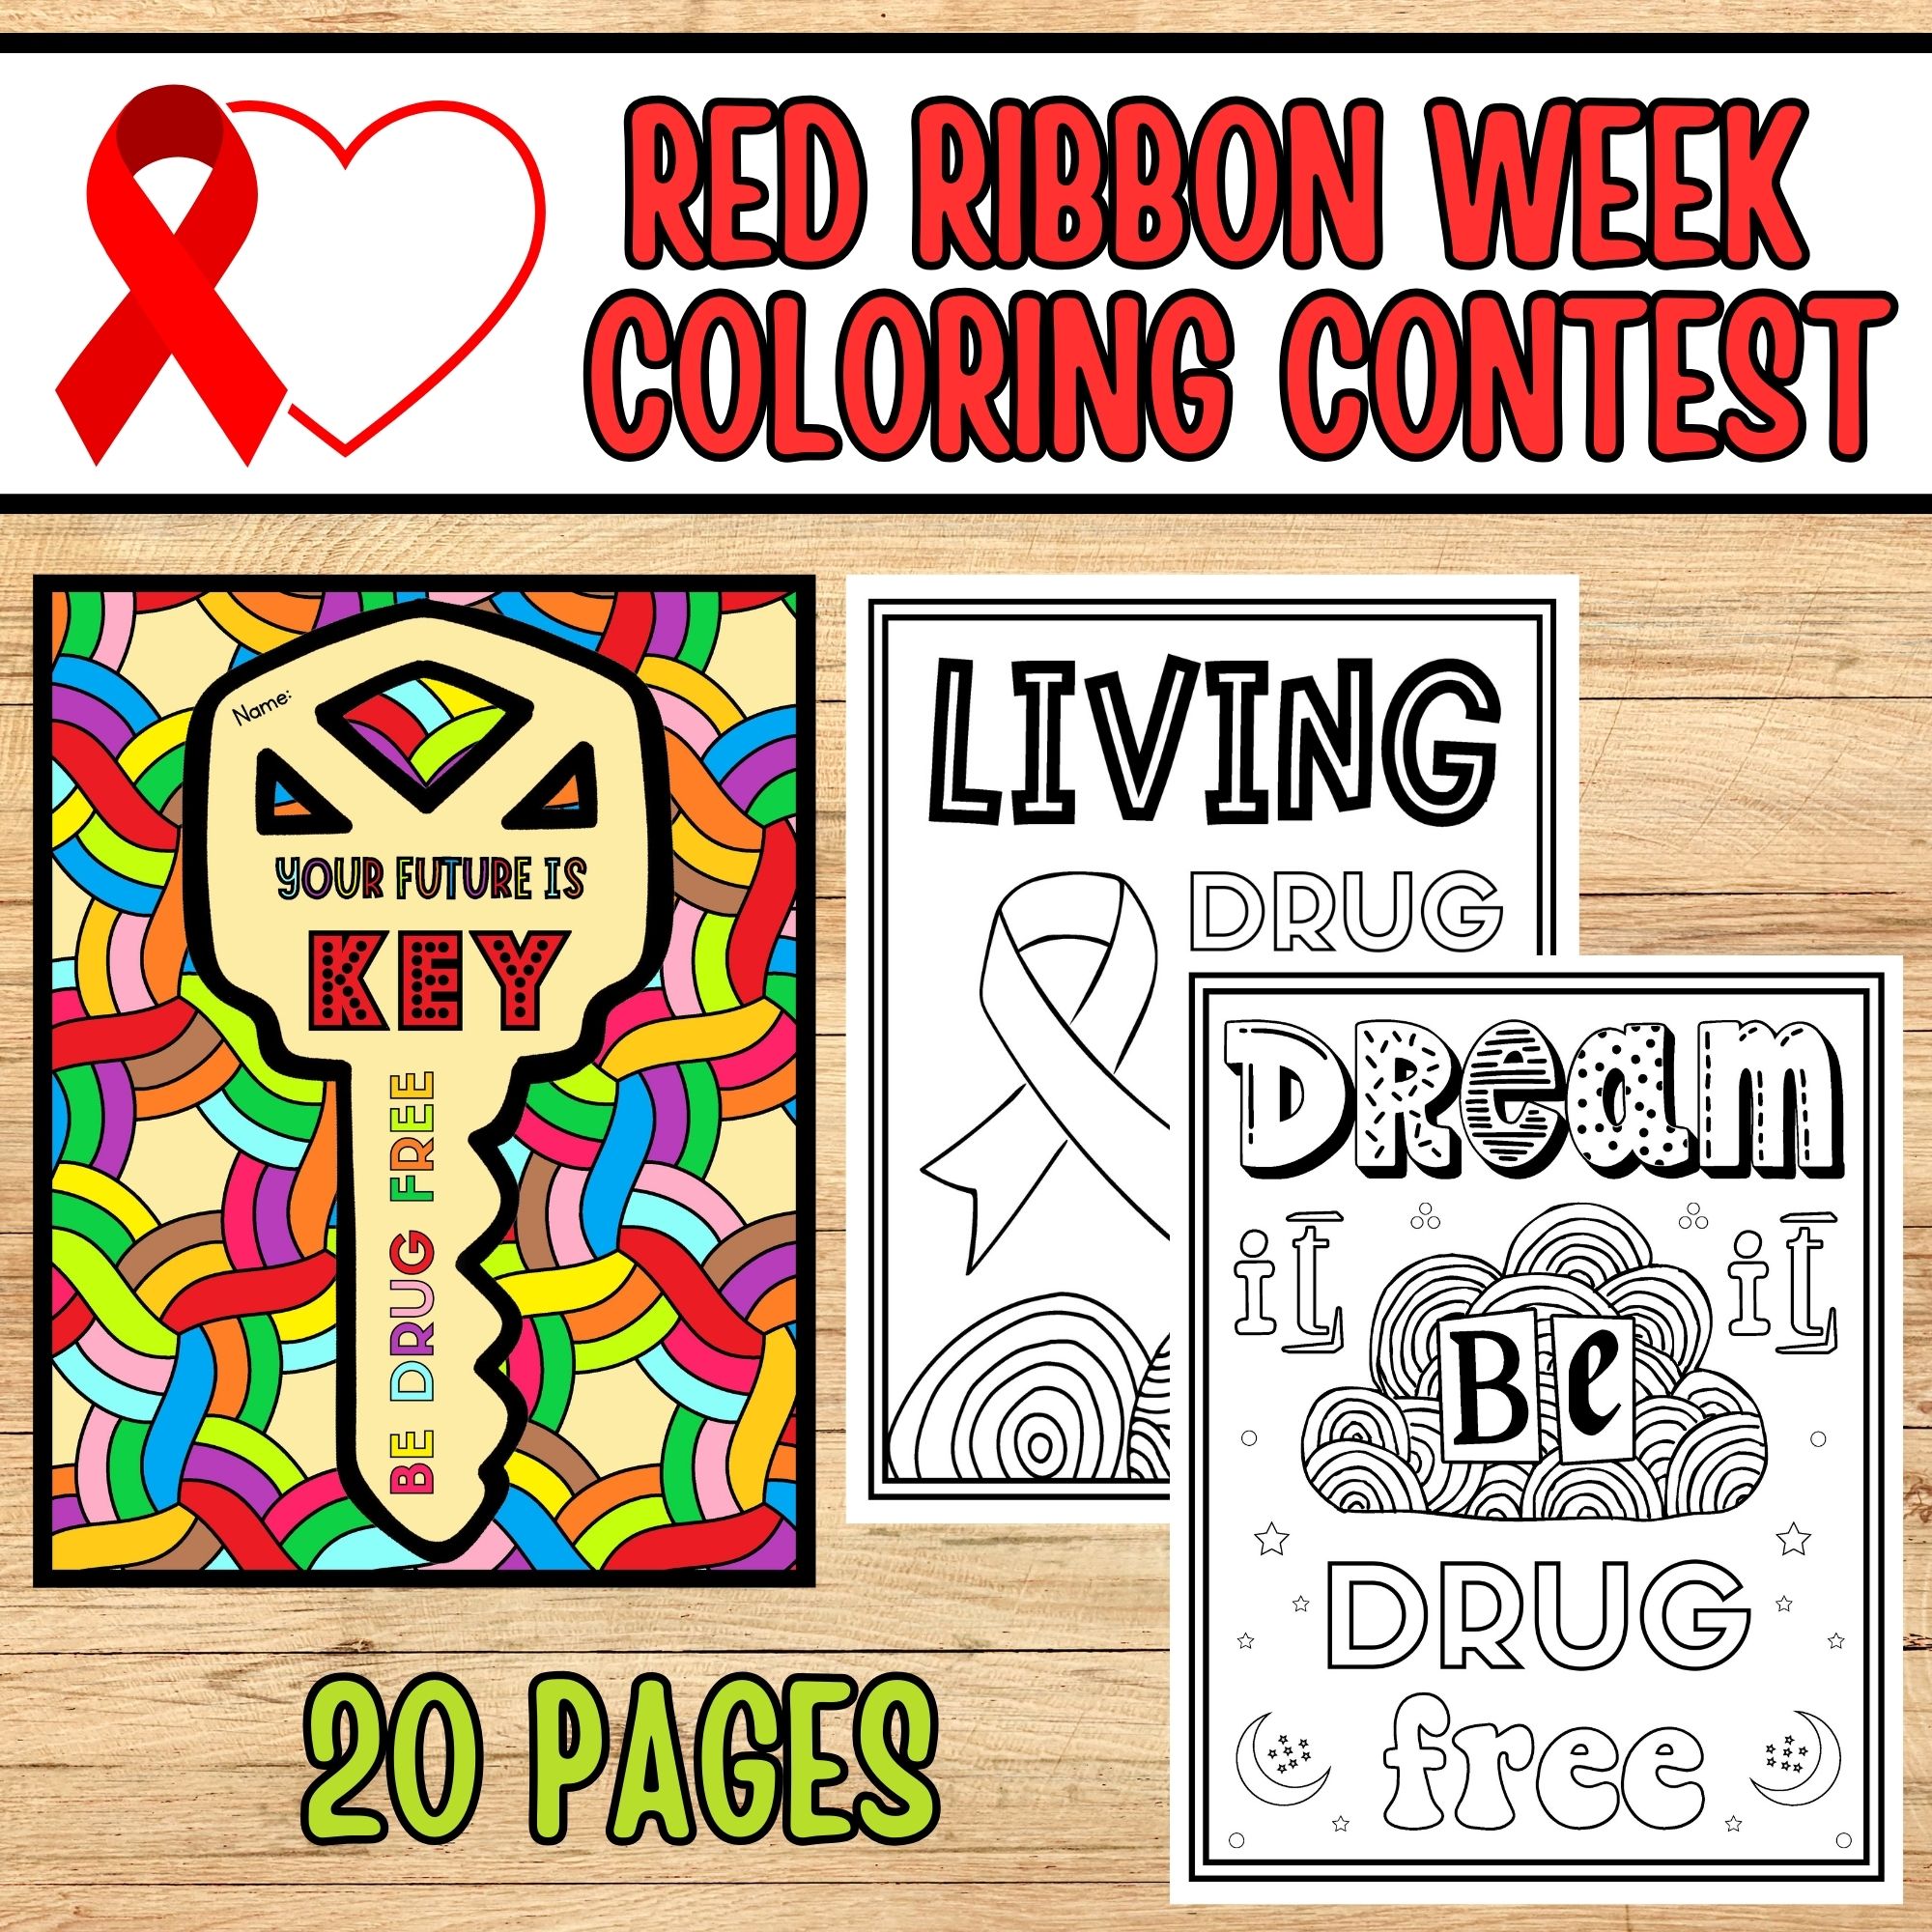 Red ribbon week coloring pages red ribbon week coloring contest made by teachers